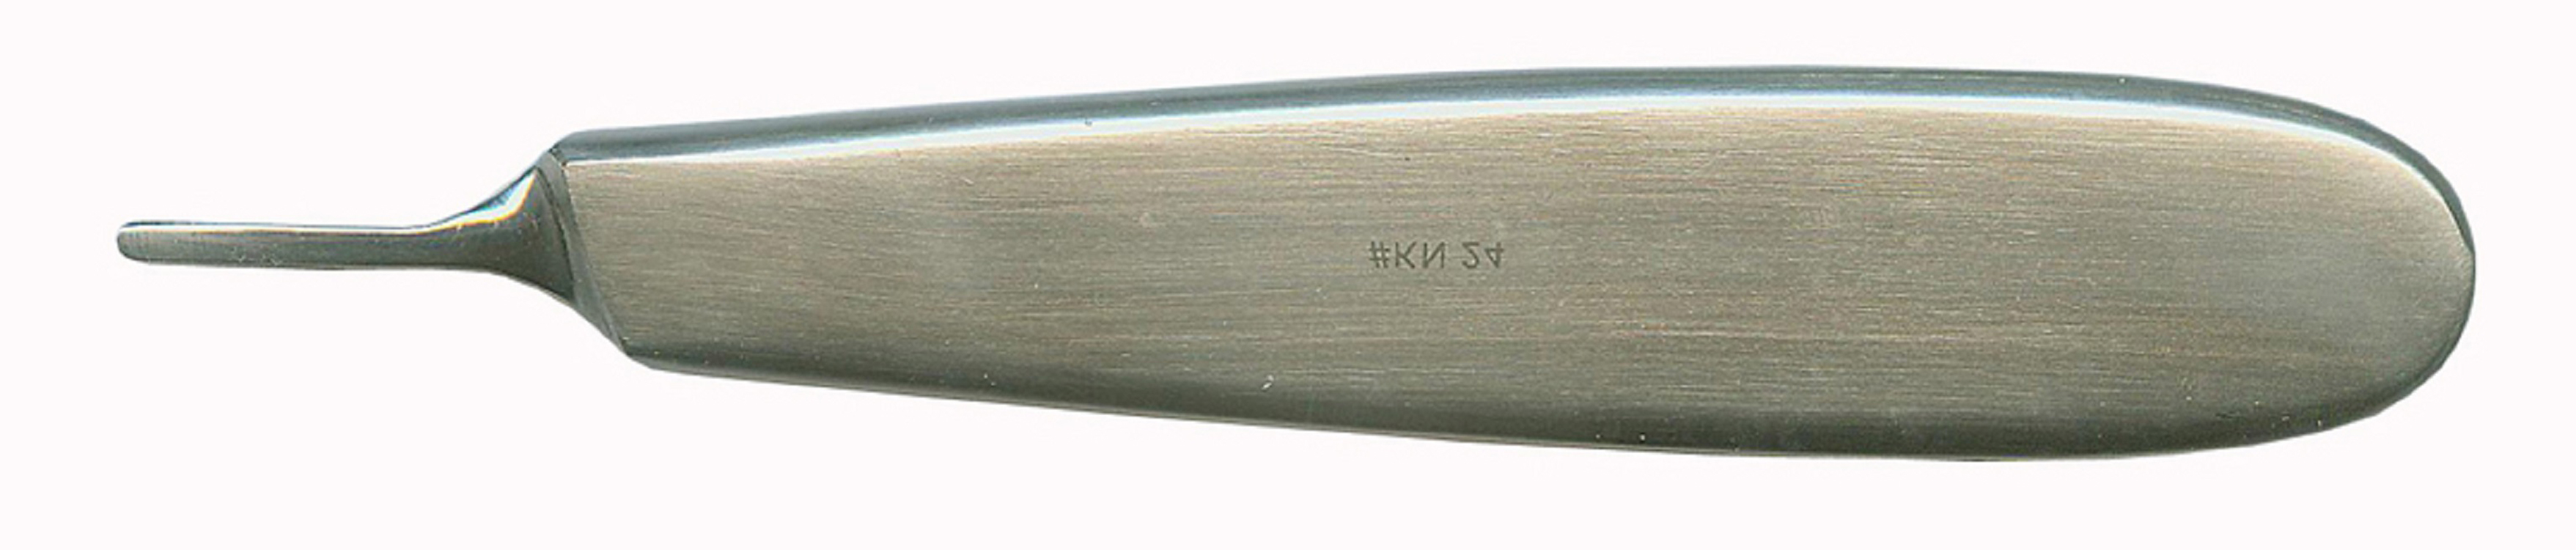 STAINLESS HOLLOW SCALPEL HANDLE FOR blades 20-26